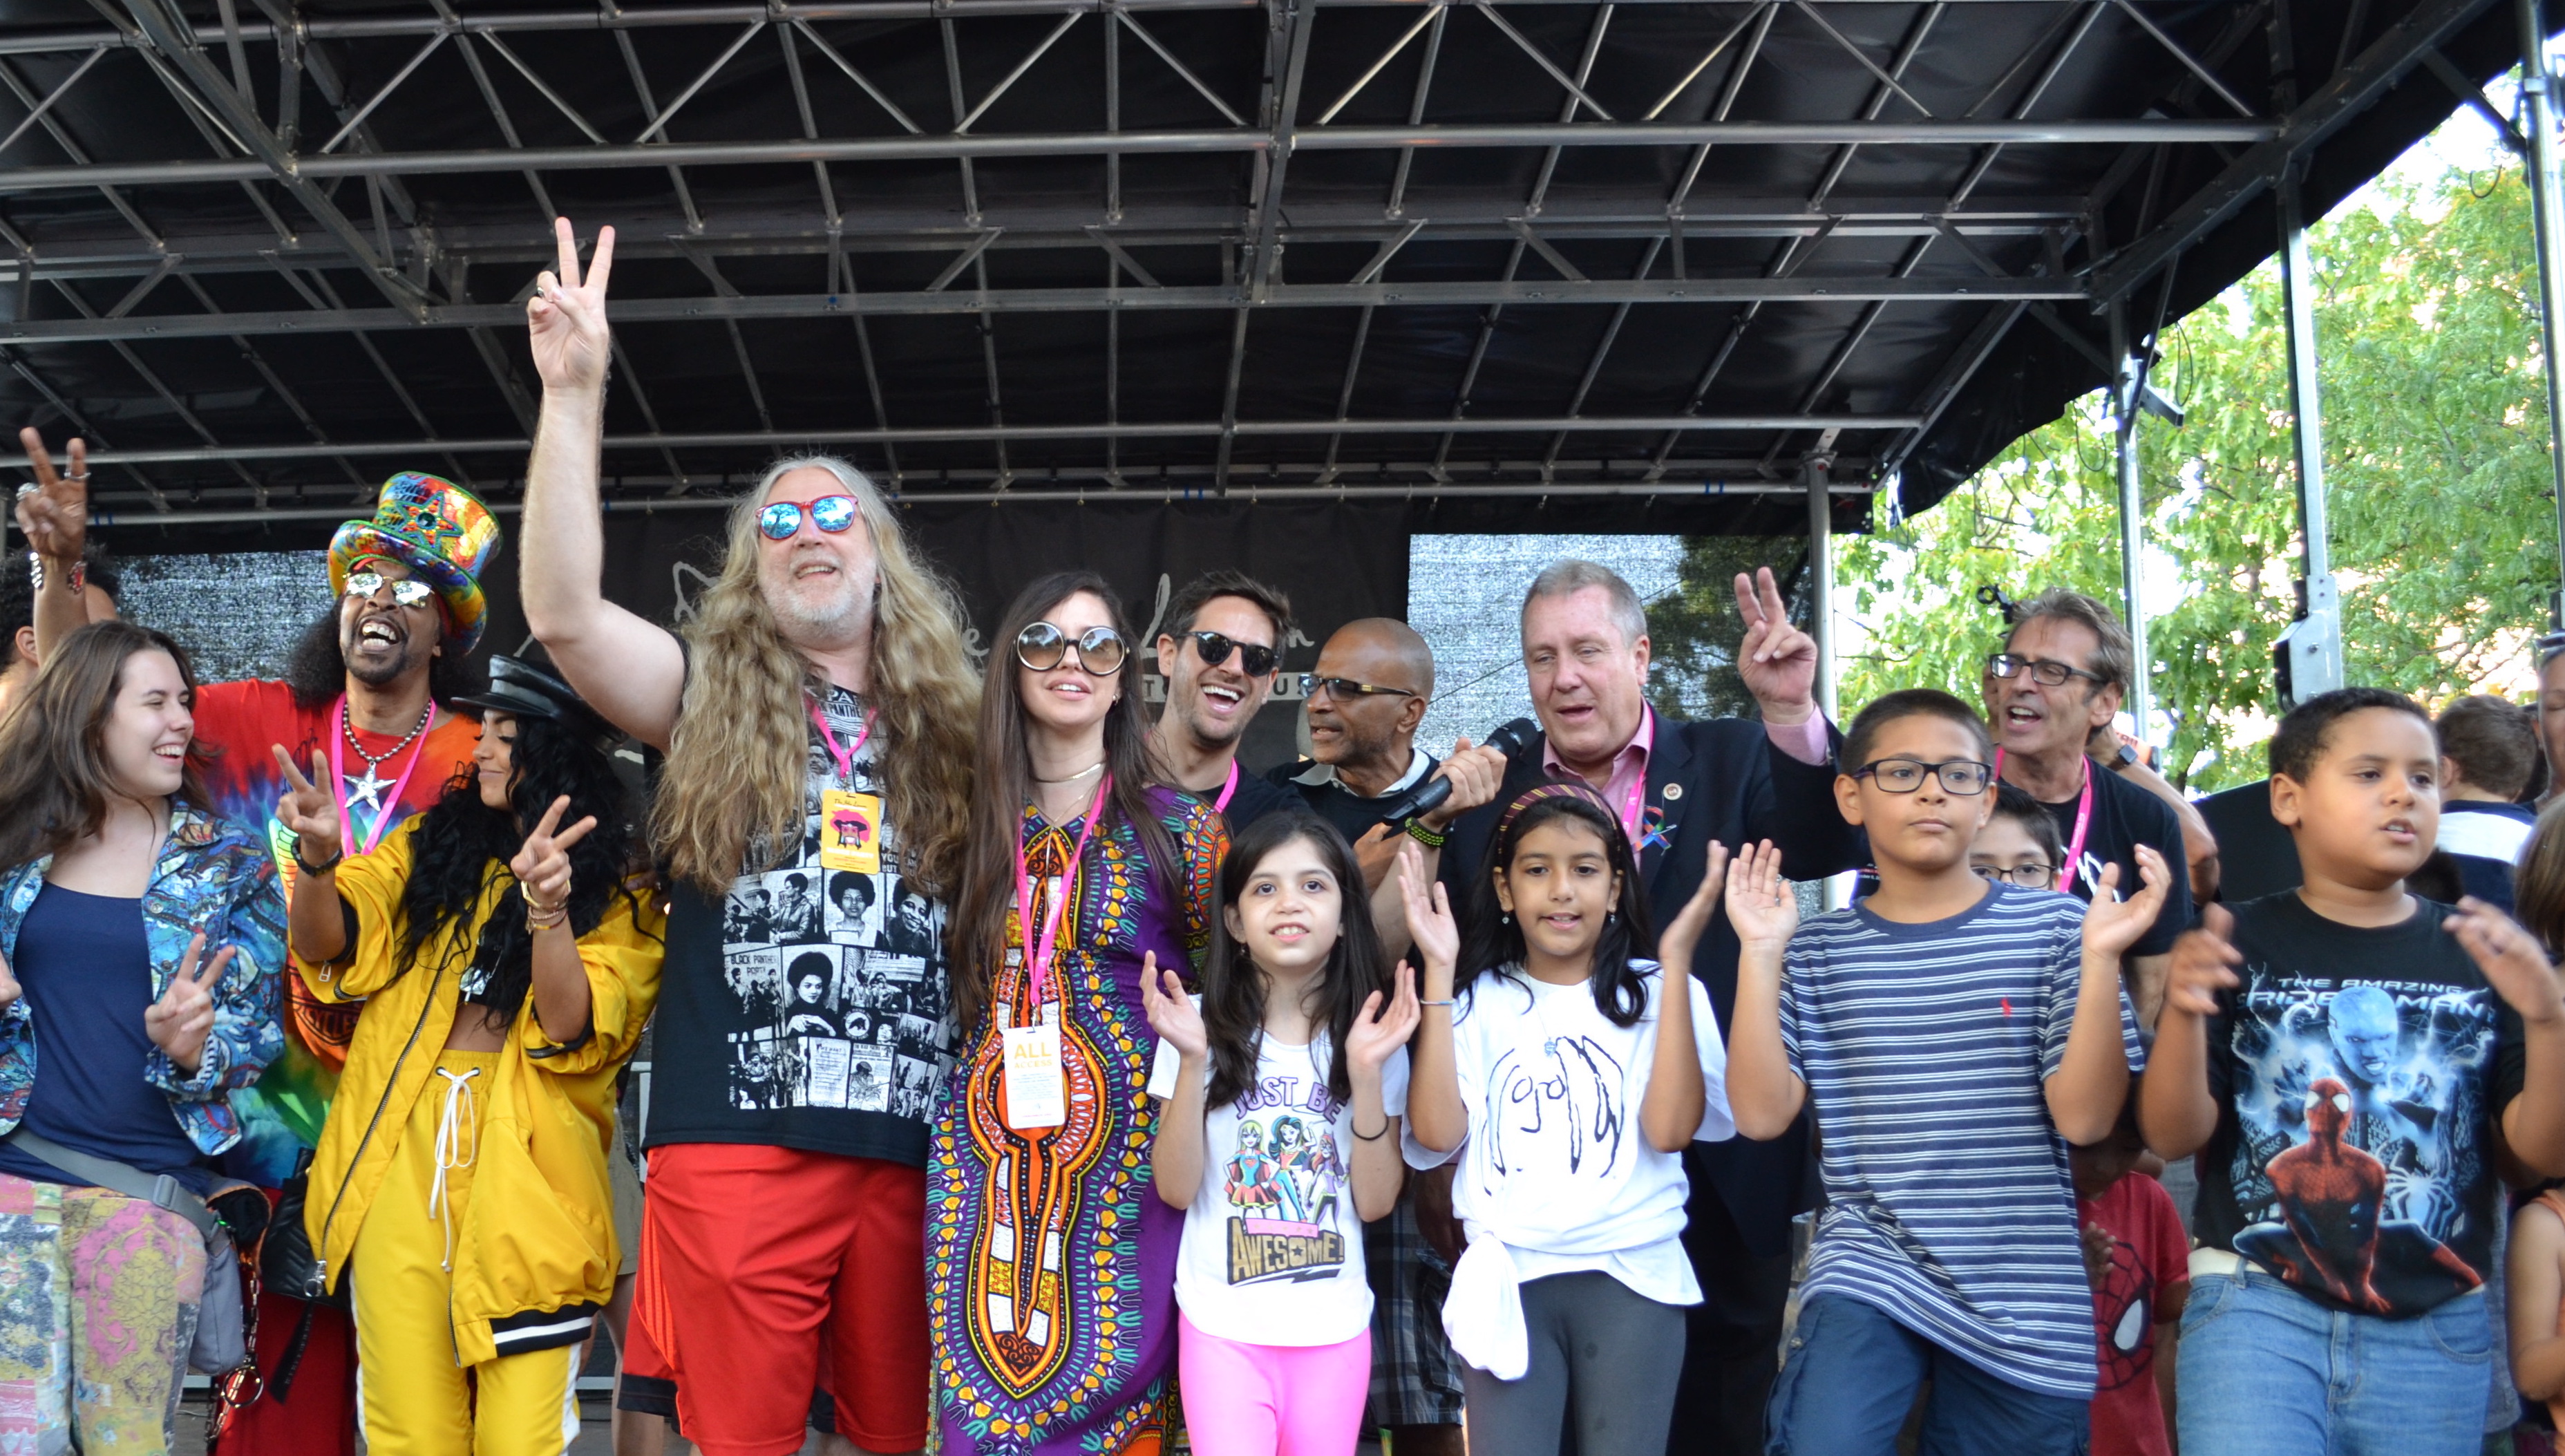 NYC Council Education Committee Chairperson Dromm, Bootsy Collins host John Lennon Educational Tour Bus Block Party in Jackson Heights